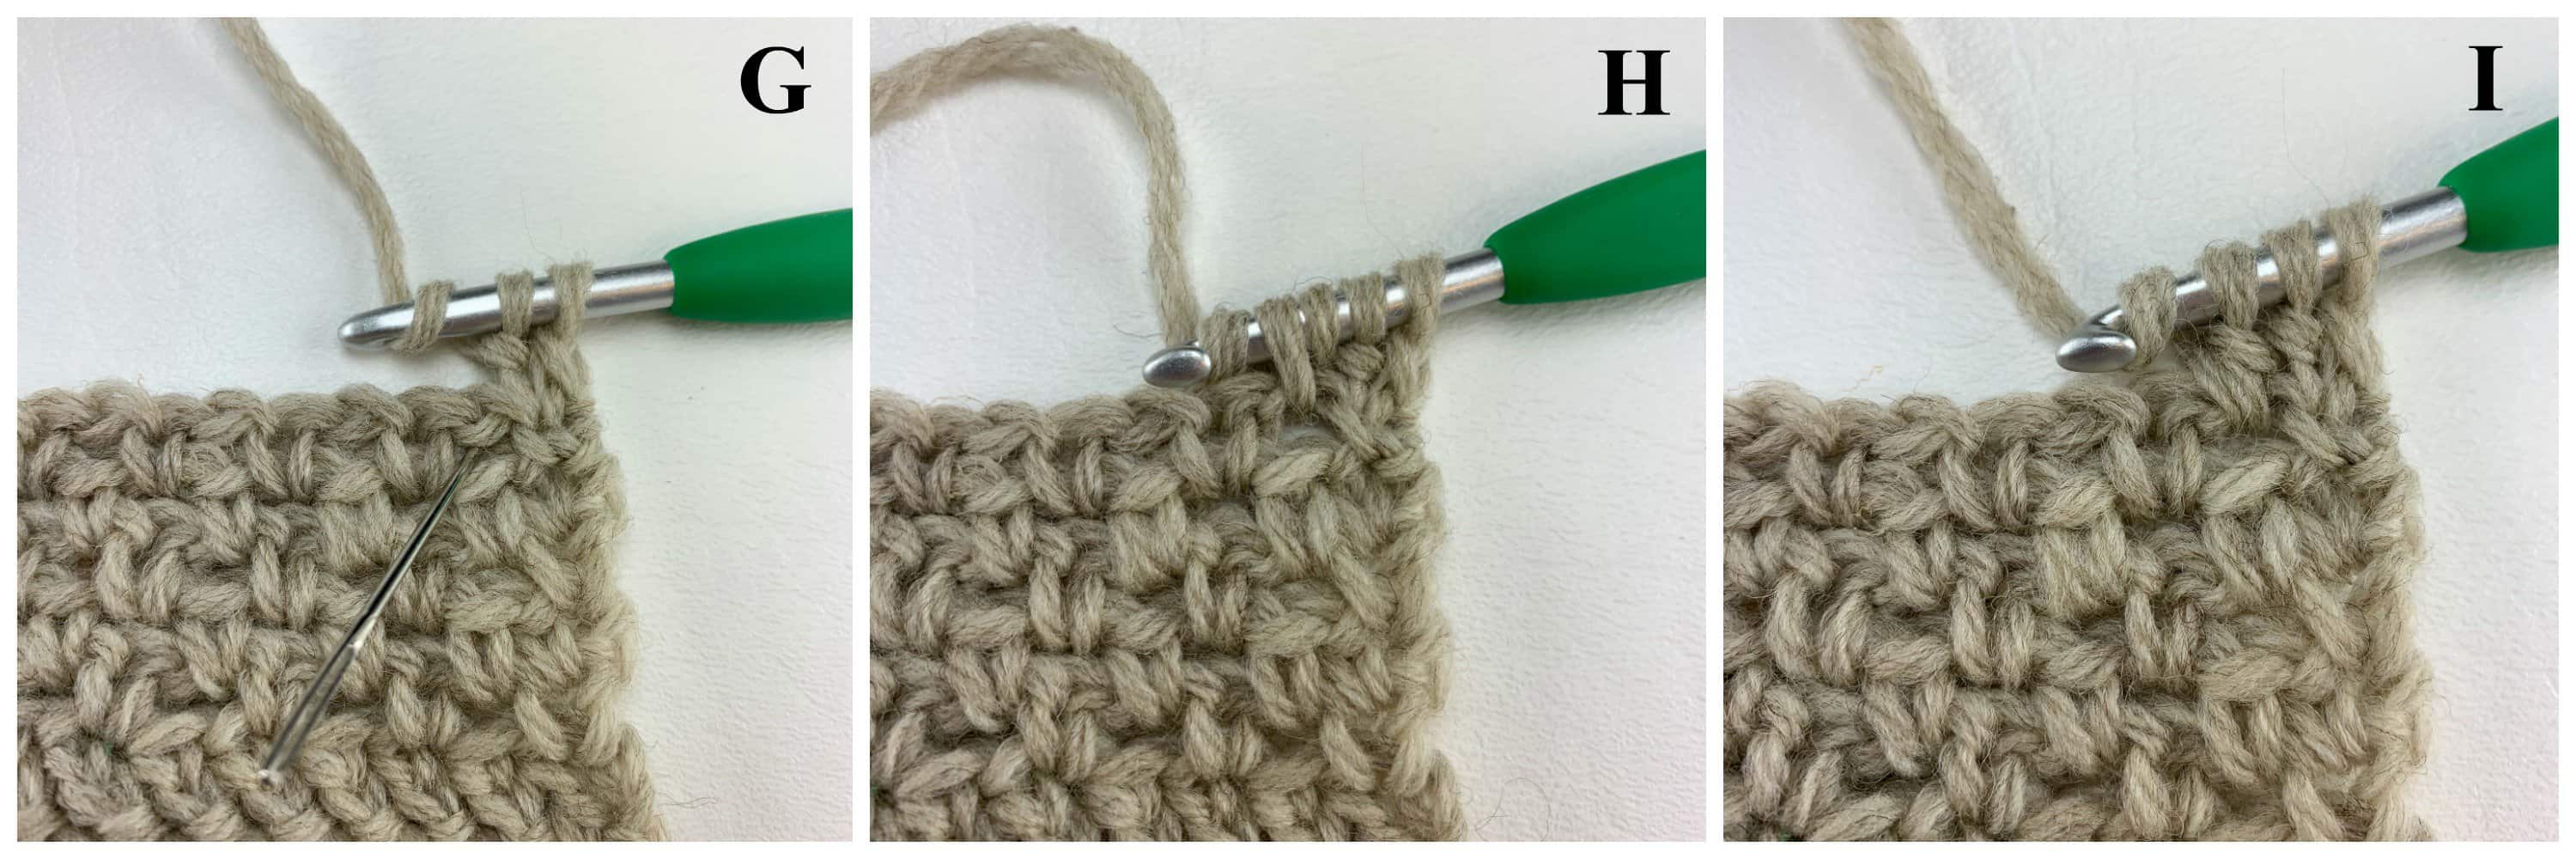 Learn to Crochet the Alternate Double Crochet Decrease, also know as a chainless double crochet - tutorial by A Crocheted Simplicity #crochetstitchtutorial #chainlessstitch #crochetstitchdecrease #alternatedoublecrochet